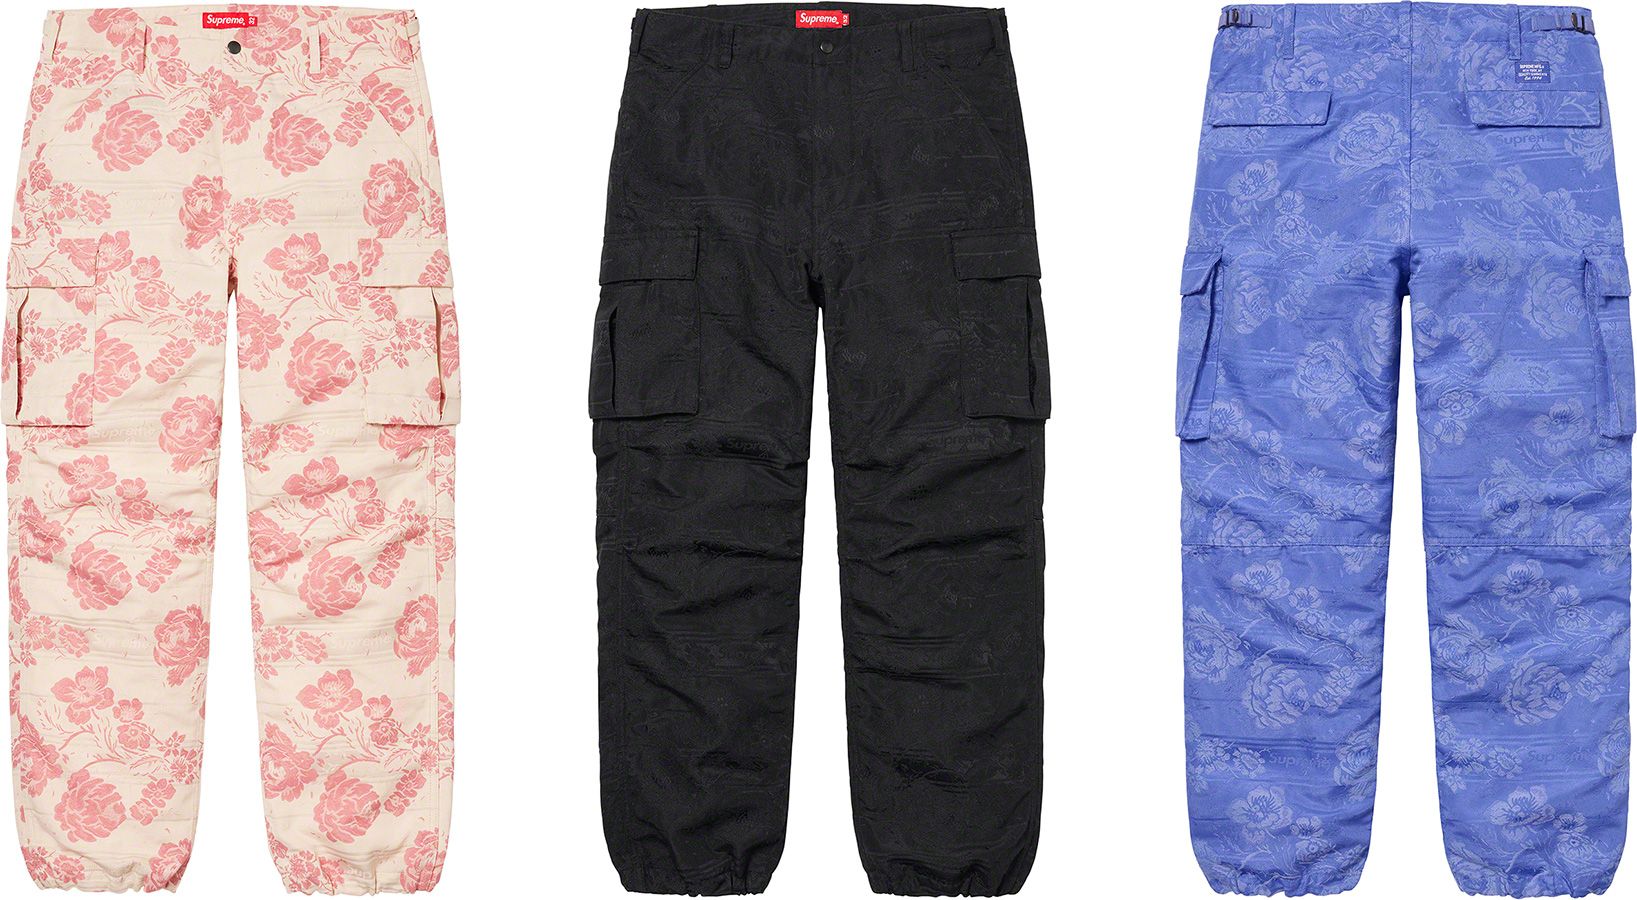 Floral Tapestry Cargo Pant - Spring/Summer 2021 Preview – Supreme